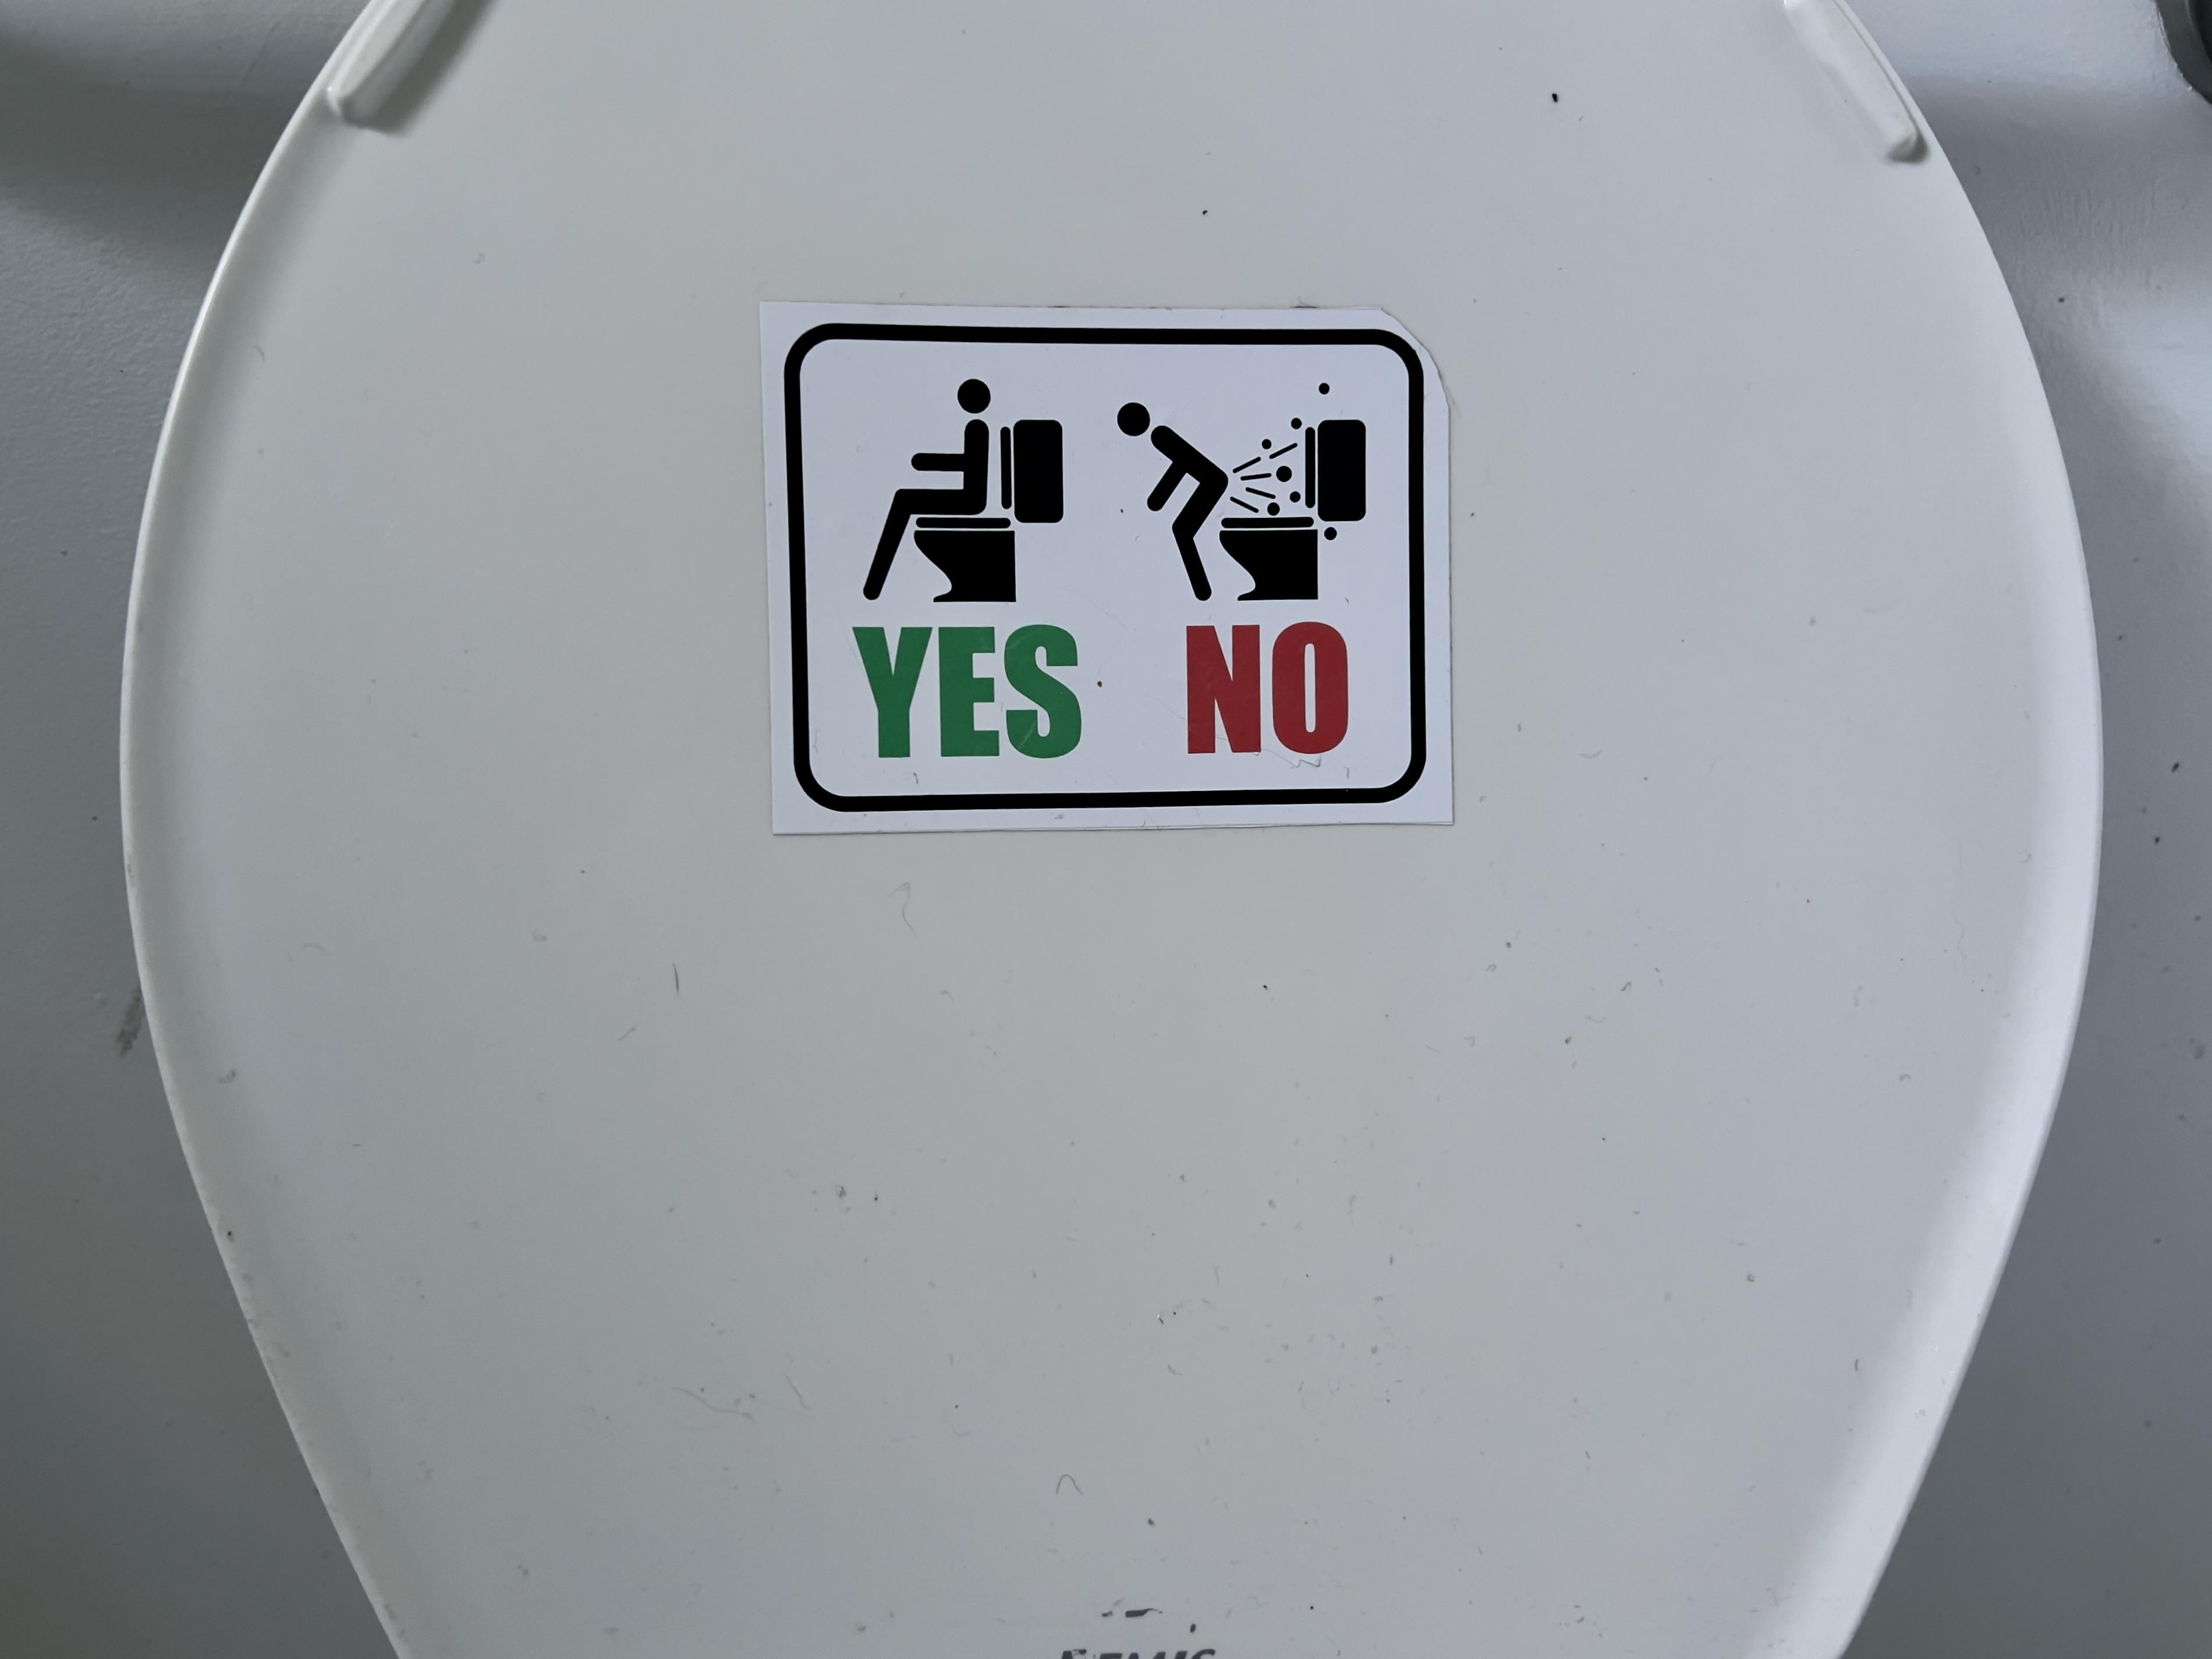 found on a toilet lid - don’t even want to know what’s been happening here